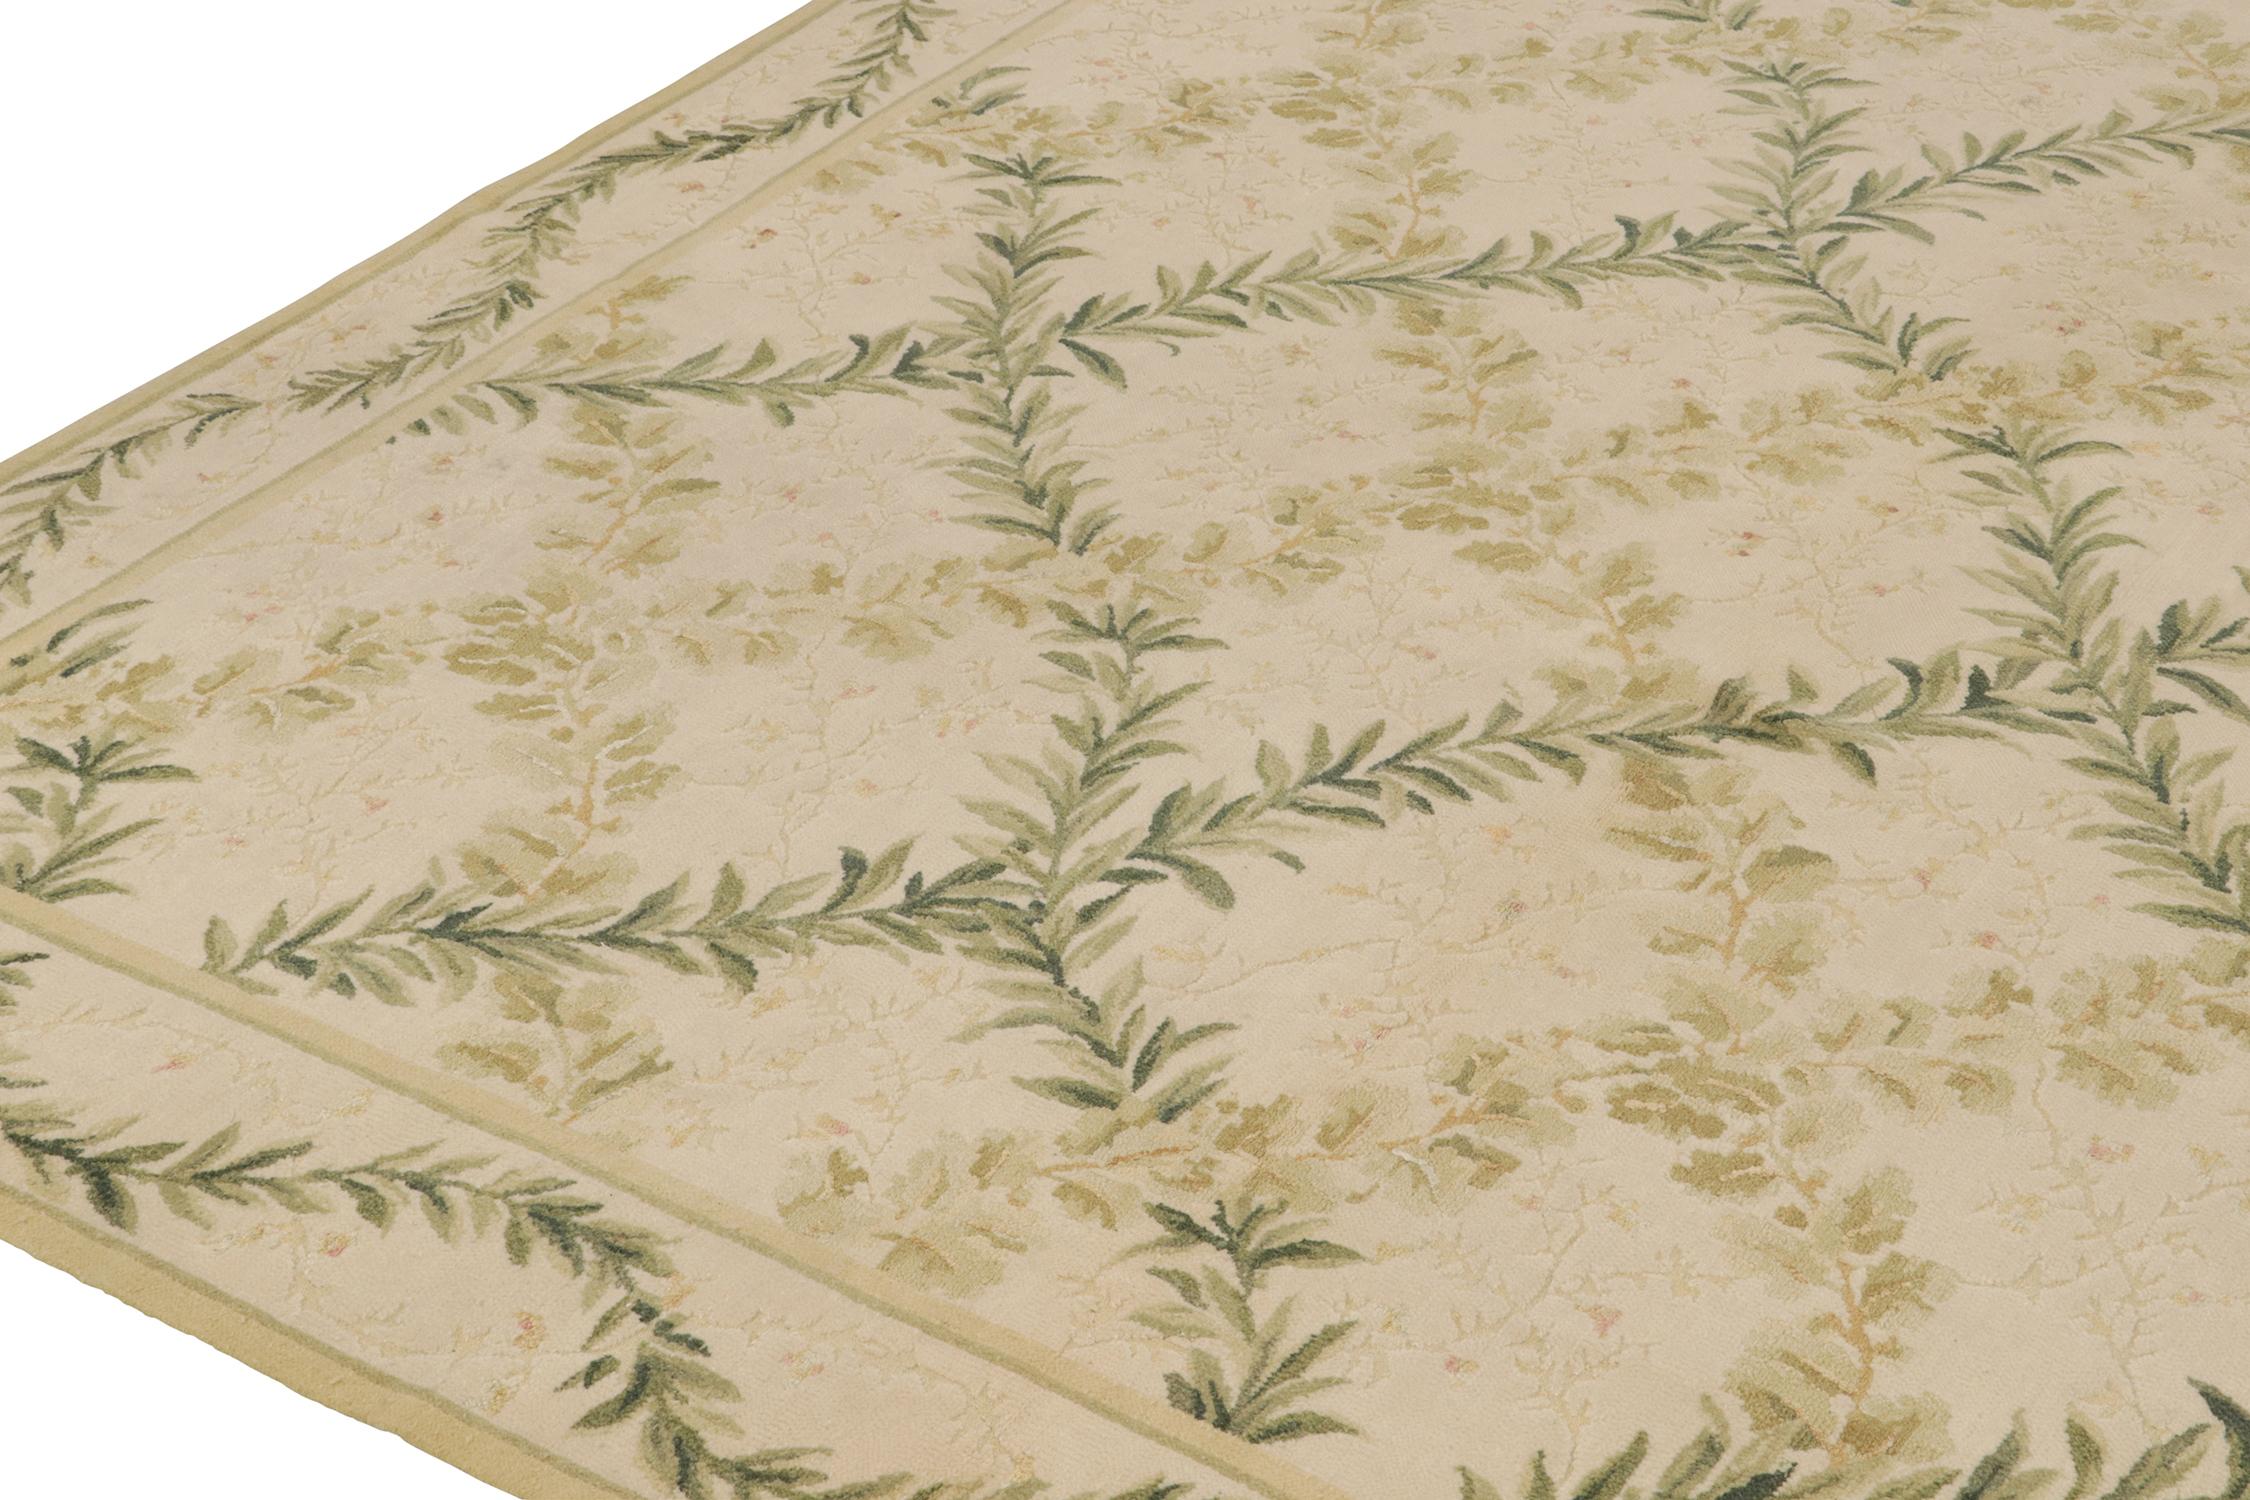 Hand-Knotted Rug & Kilim’s Tudor Style Flat Weave in Green and Cream Trellis Floral Patterns For Sale